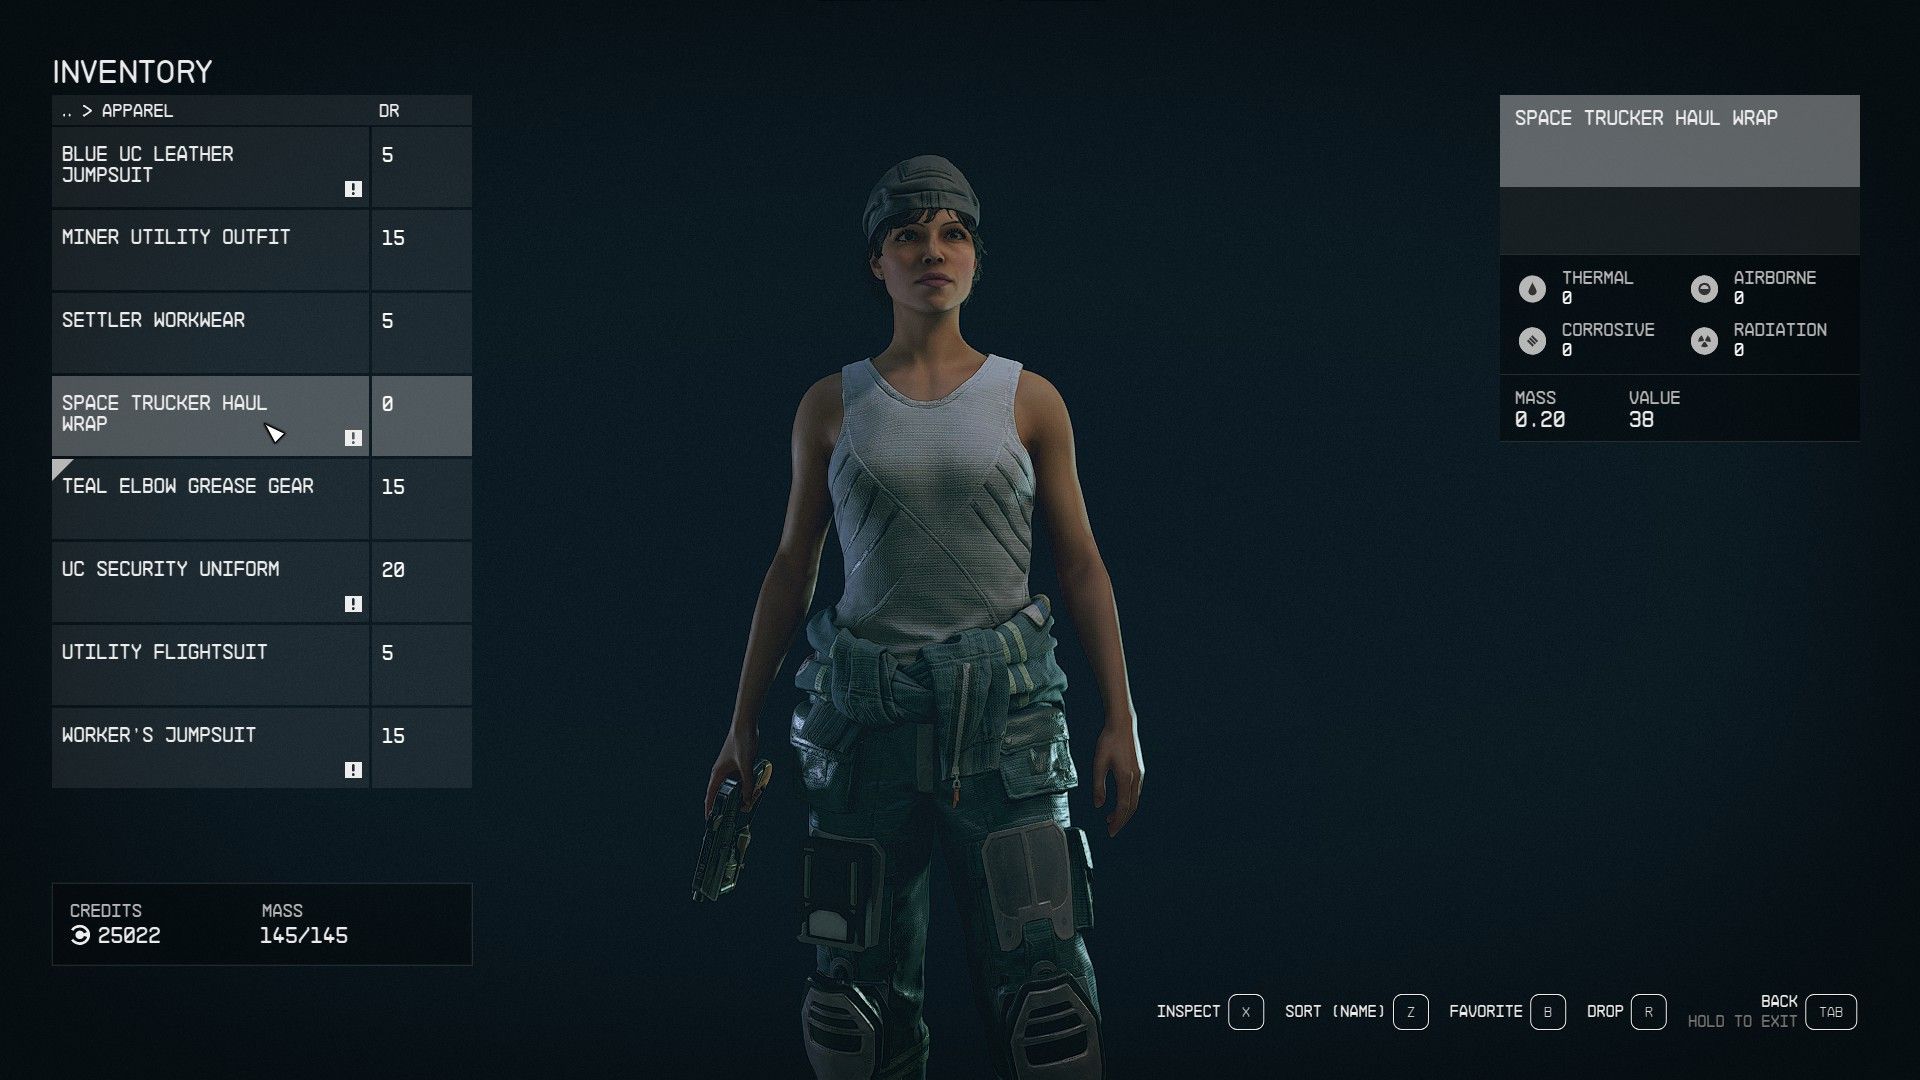 Starfield Player Wearing Teal Elbow Grease Gear Outfit In Inventory 